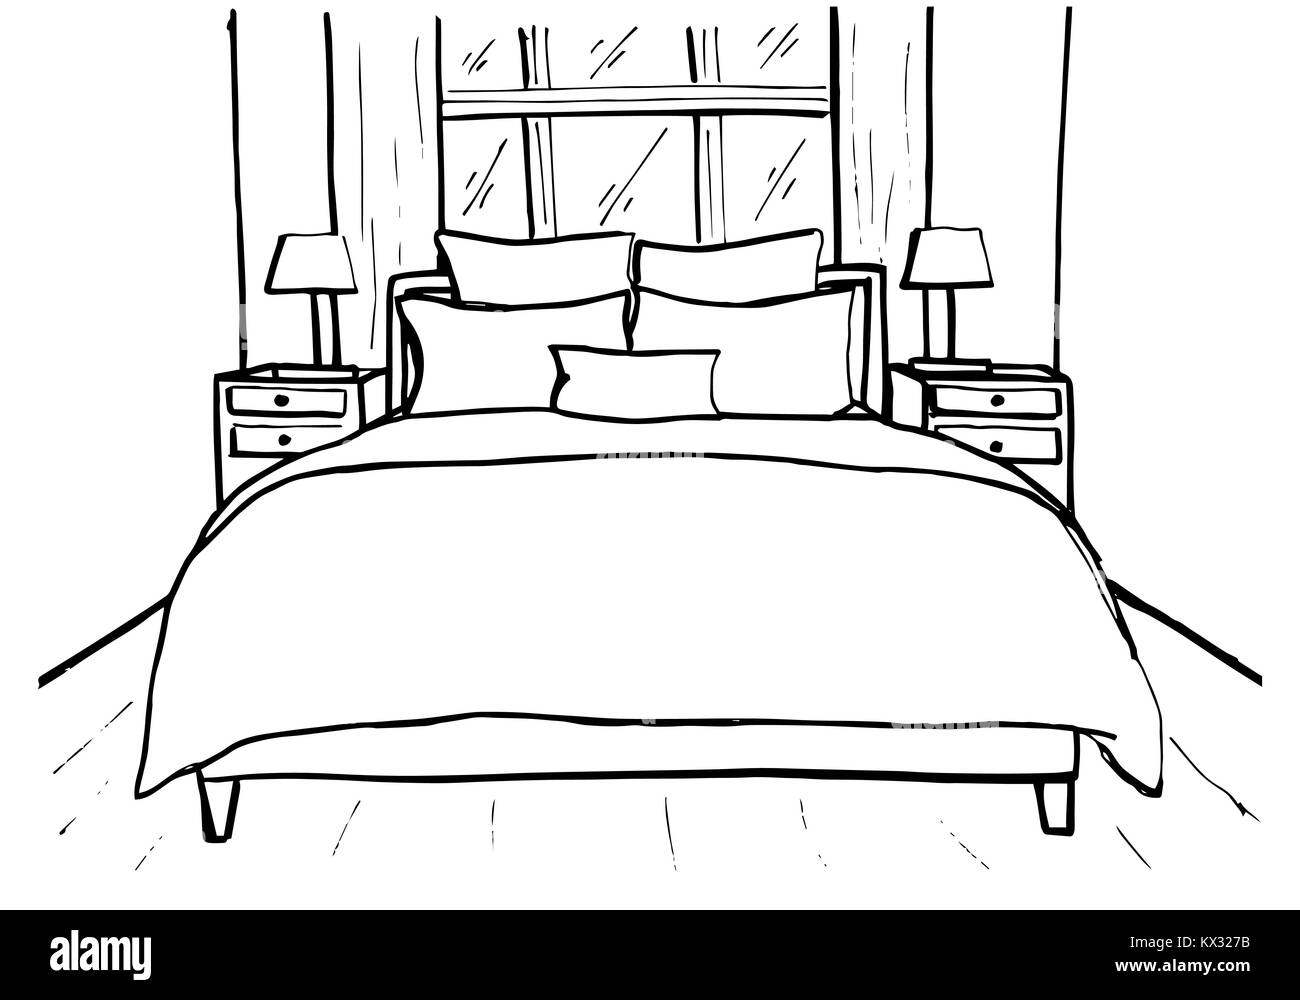 Bedroom Layouts Dimensions & Drawings | Dimensions.com